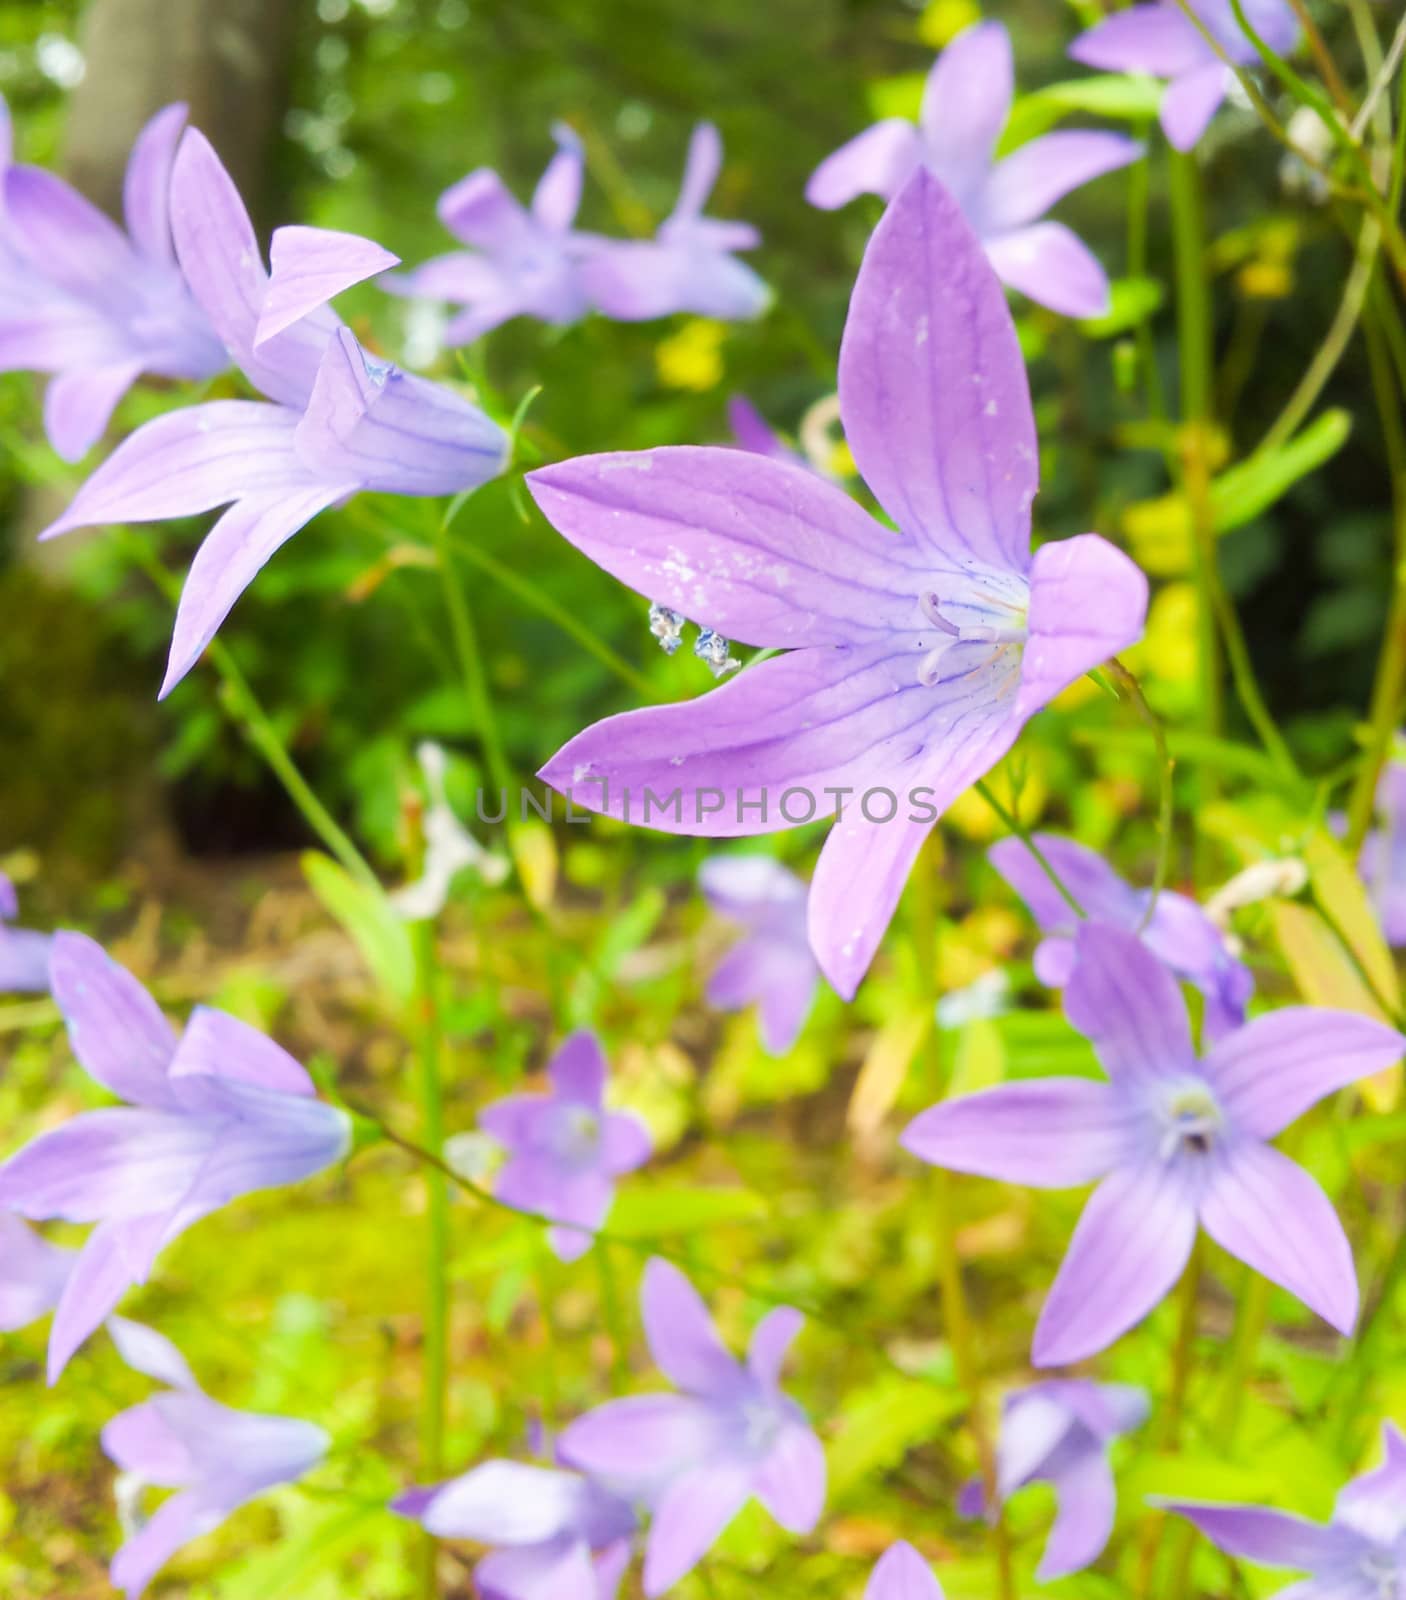 Group of beautiful violet flowers with fresh green grass